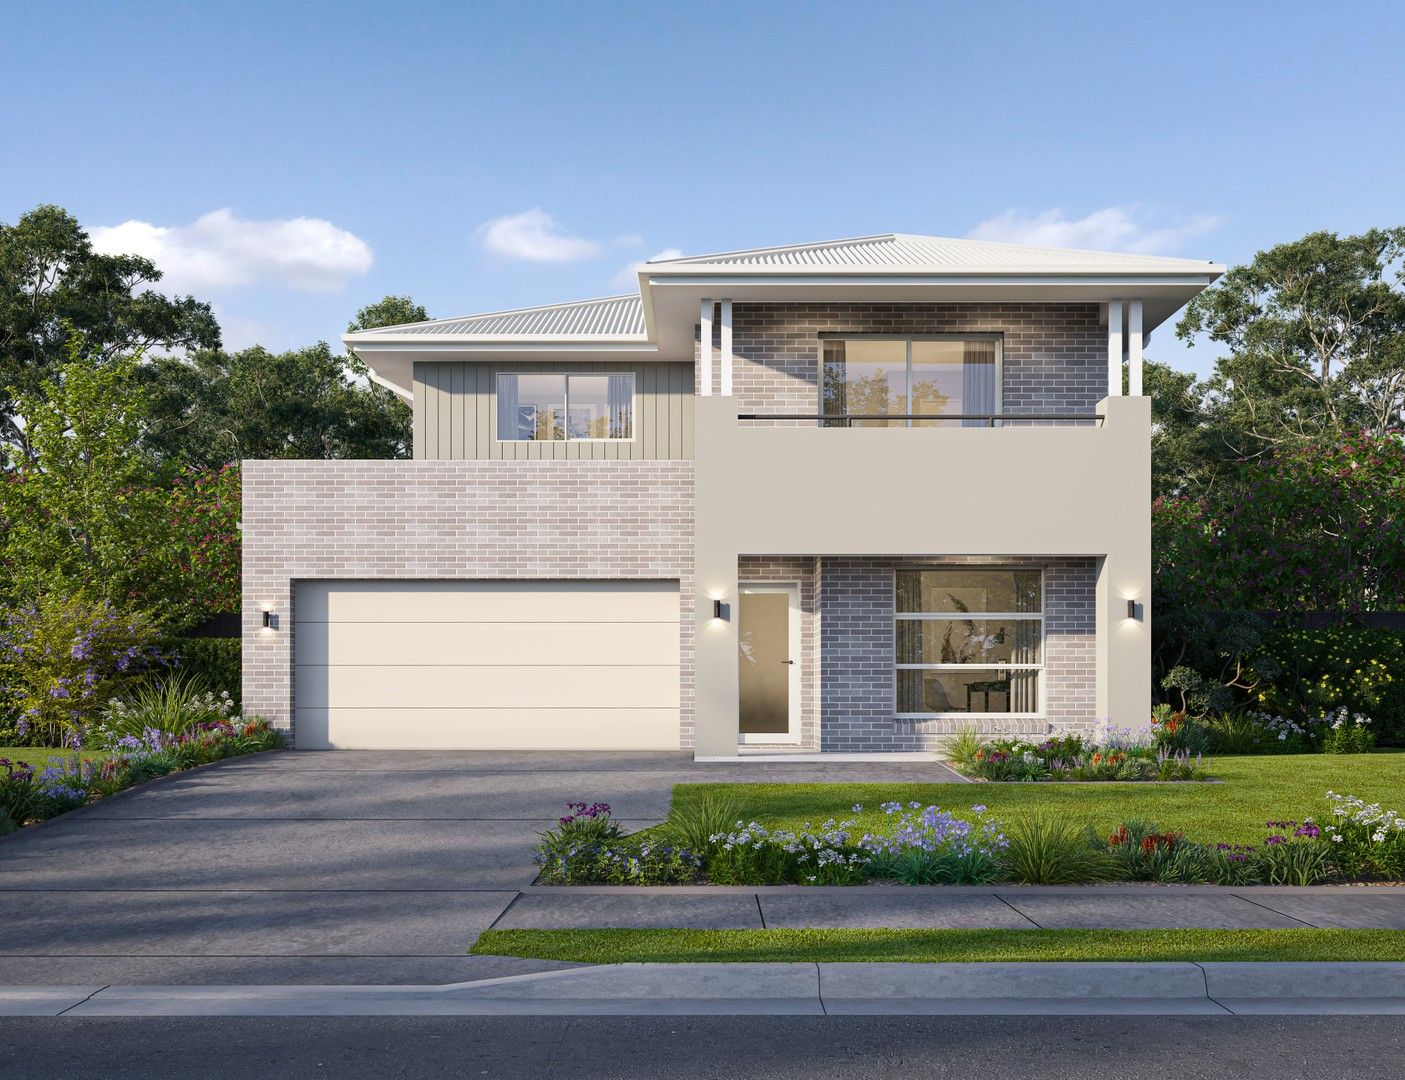 4 bedrooms New House & Land in Lot 2626 Proposed Road BOX HILL NSW, 2765